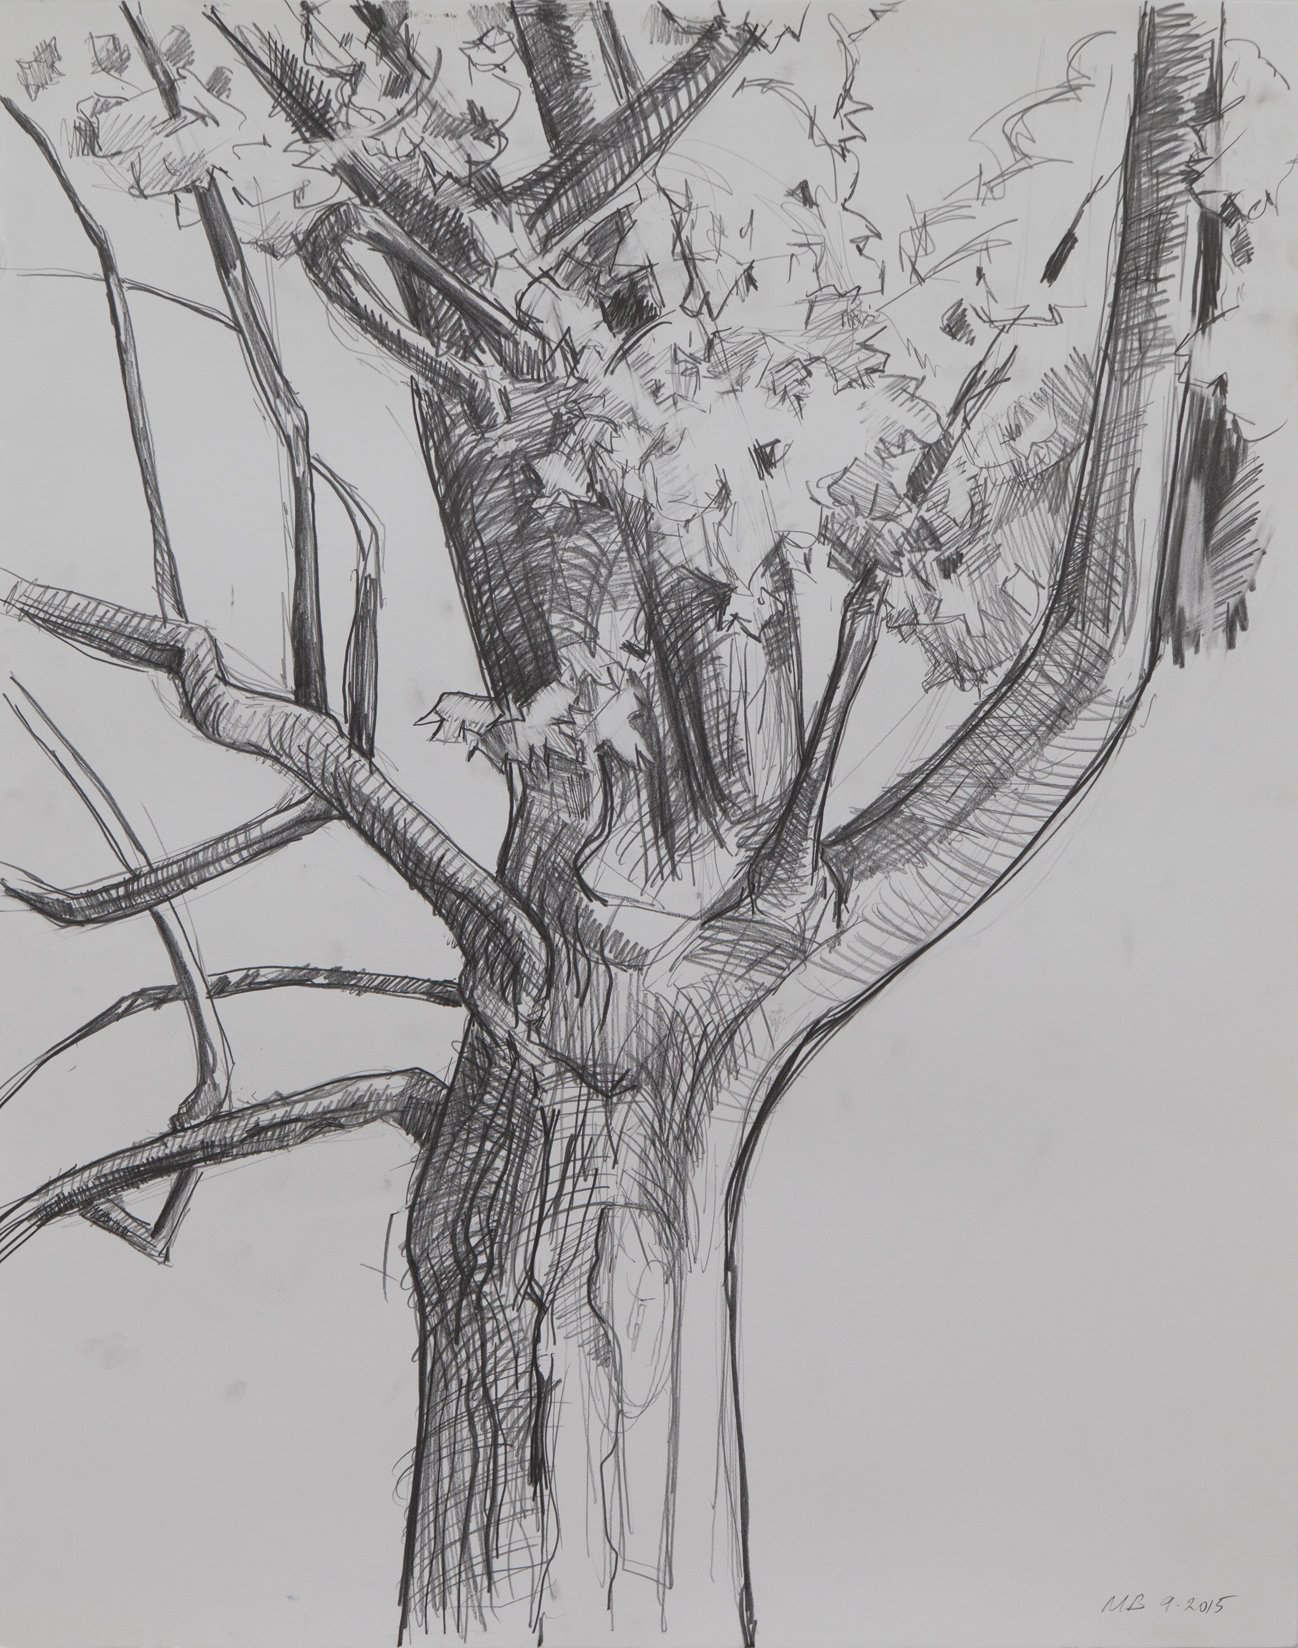    Red Maple, Fall,   graphite, 24 x 19 in, 2016 